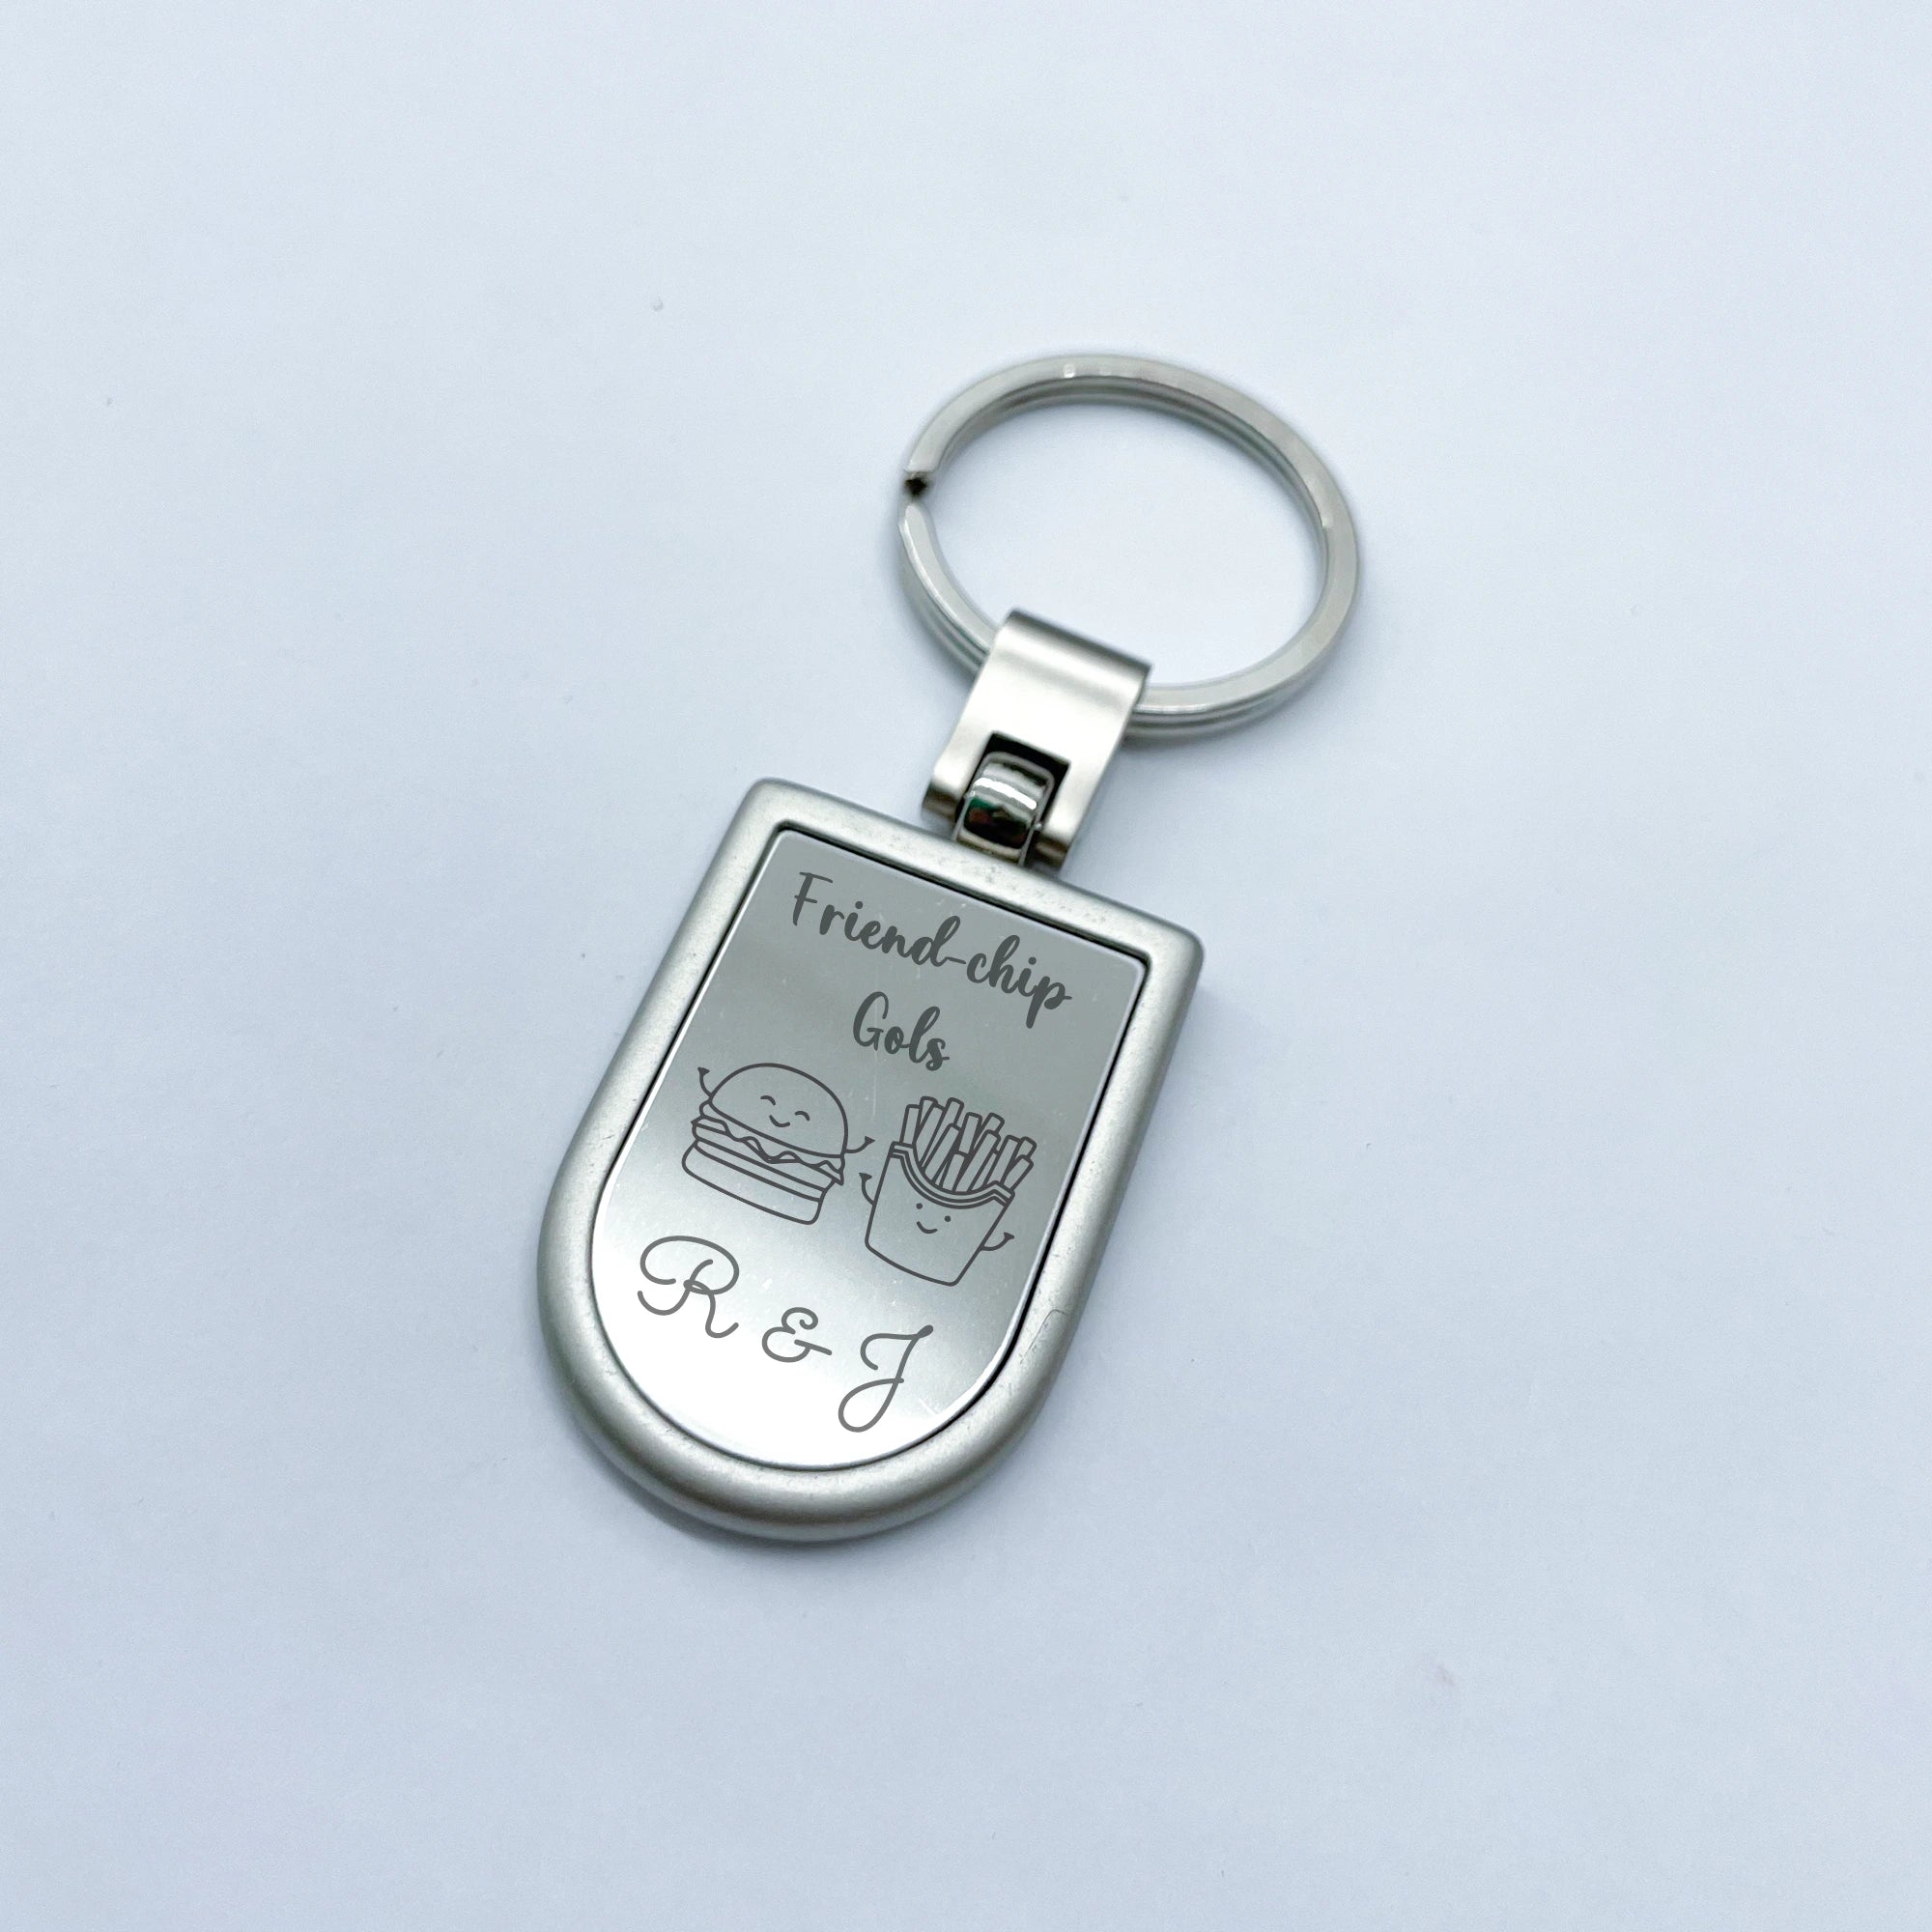 Car Keychain,Create Your Own,Custom Engraving,Customized Keychain,Gift for Her,Gift for Him,Holiday Gift,Personalized Keyring,Photo Engraving,Shield Shape,Split Key Ring,Stainless Steel,best friend keychain